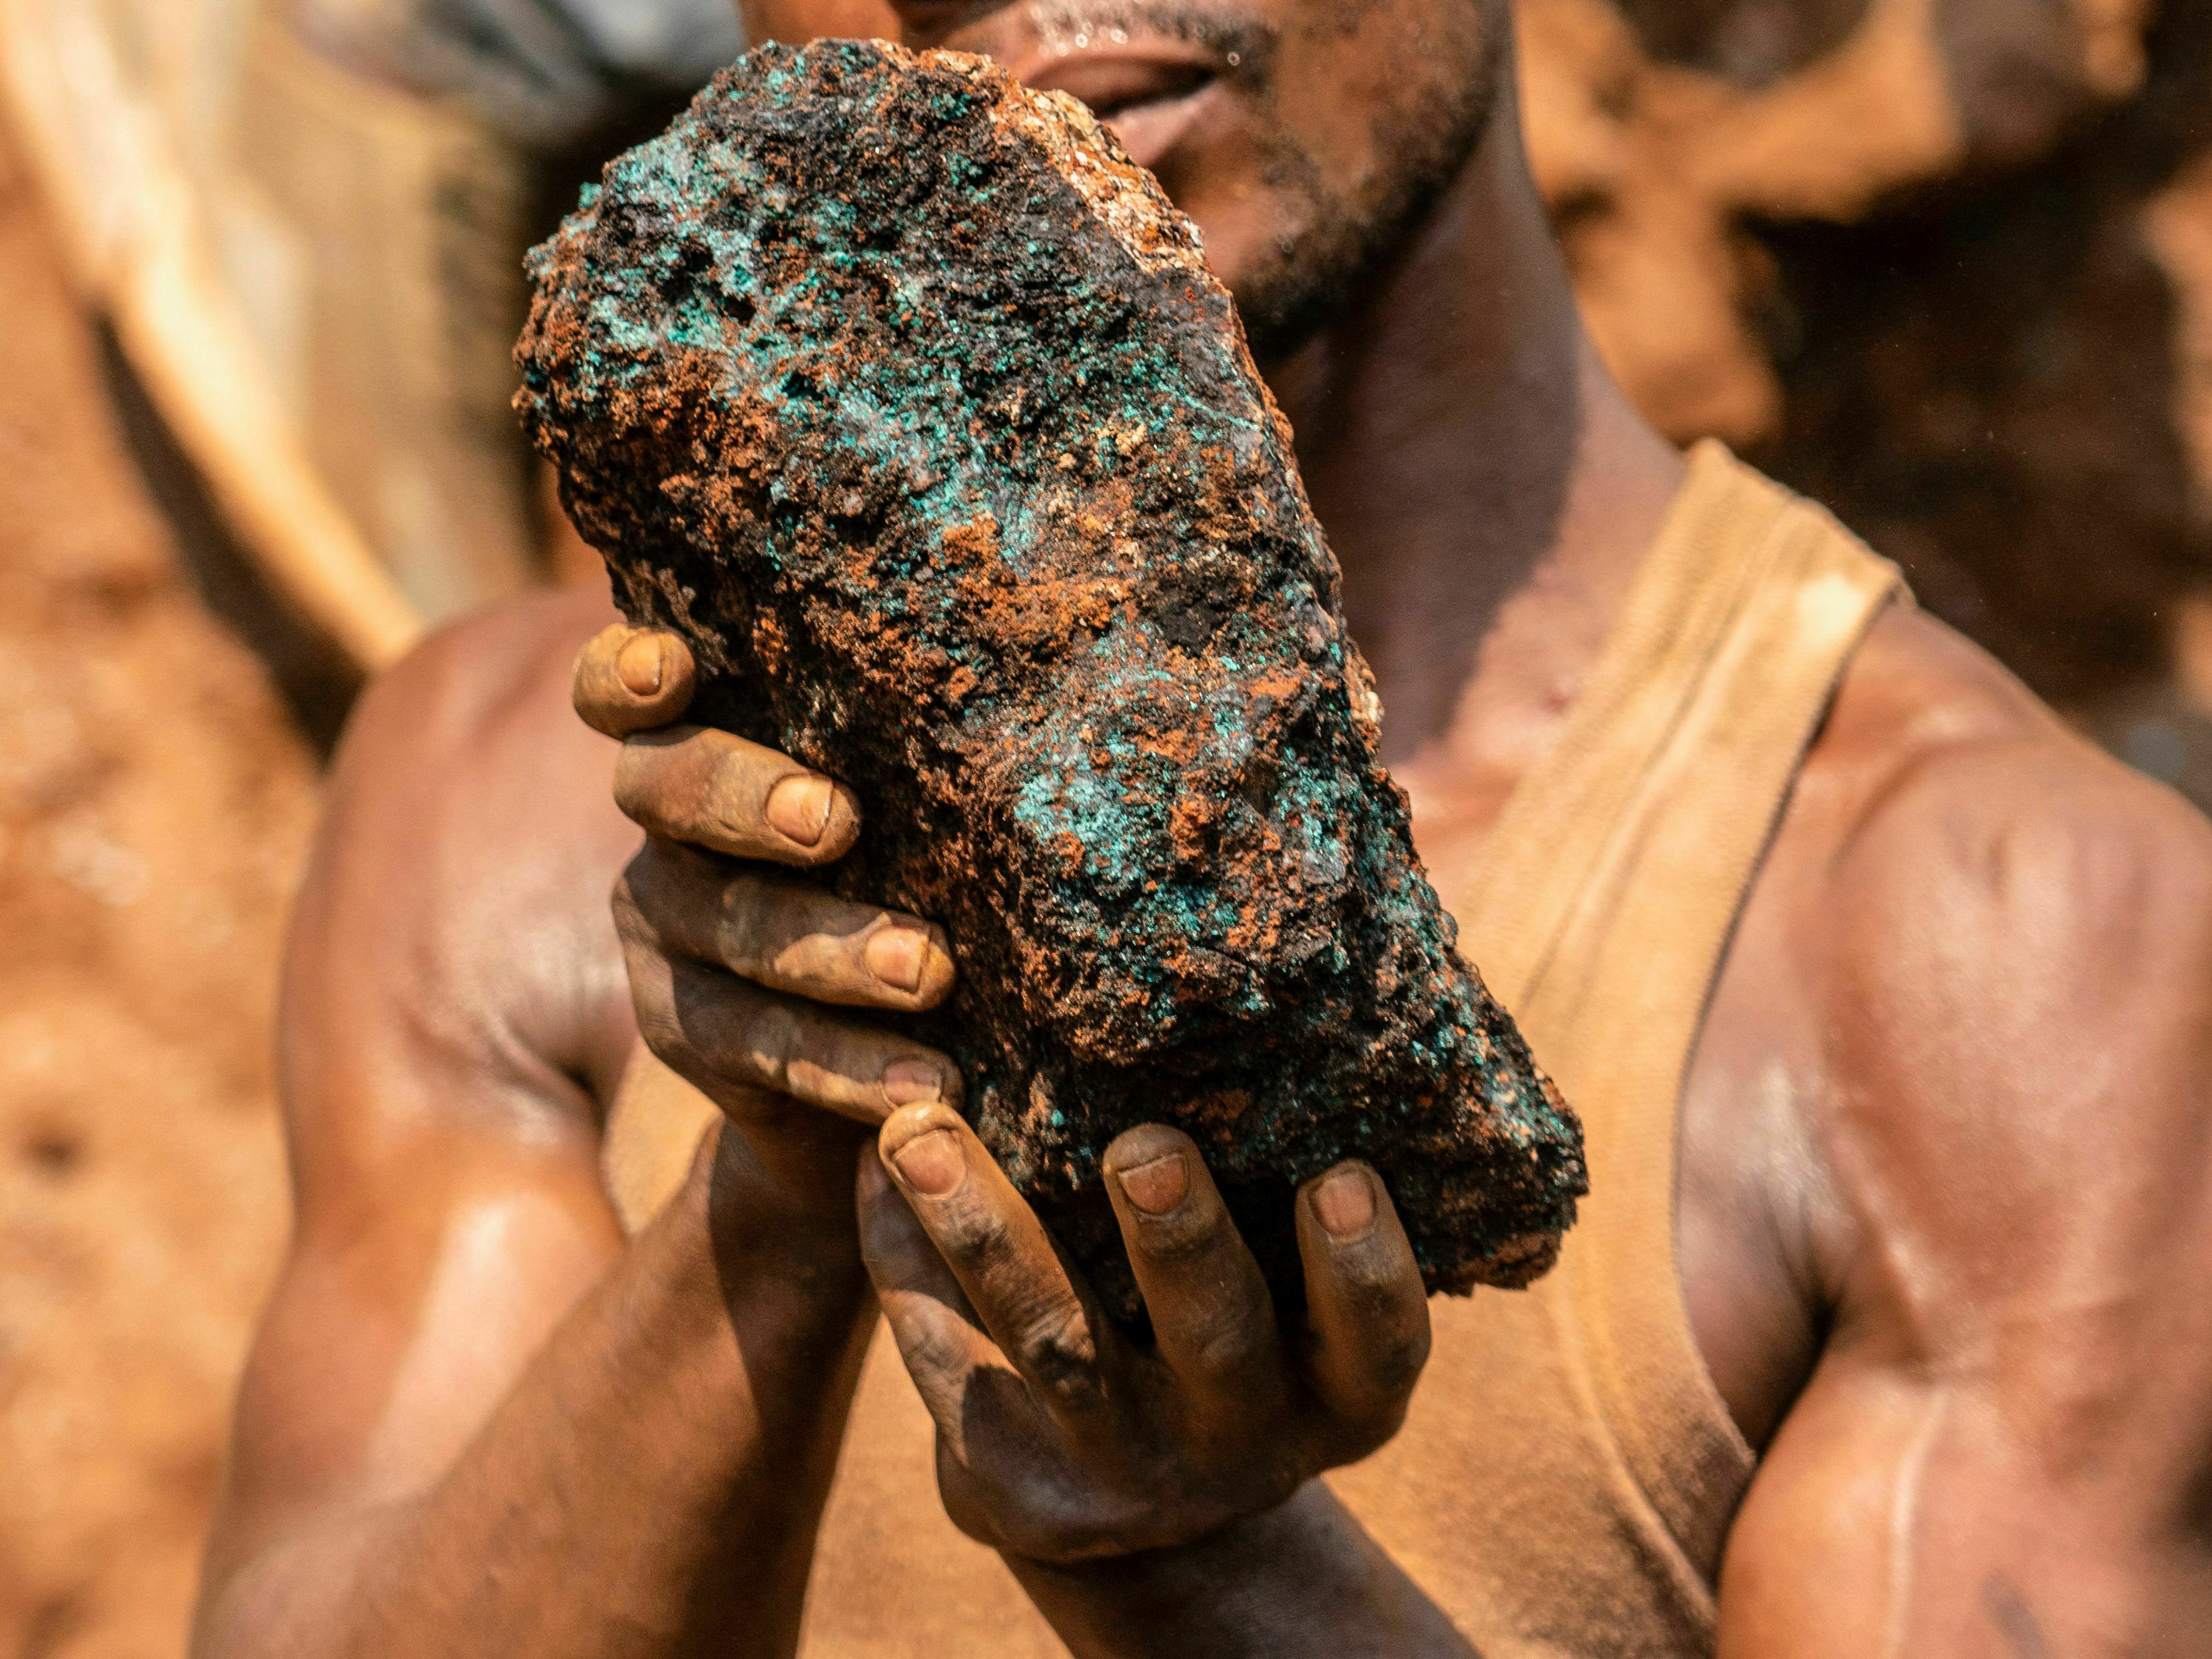 The Role of Technology Companies in Addressing Conflict Mining for Cobalt